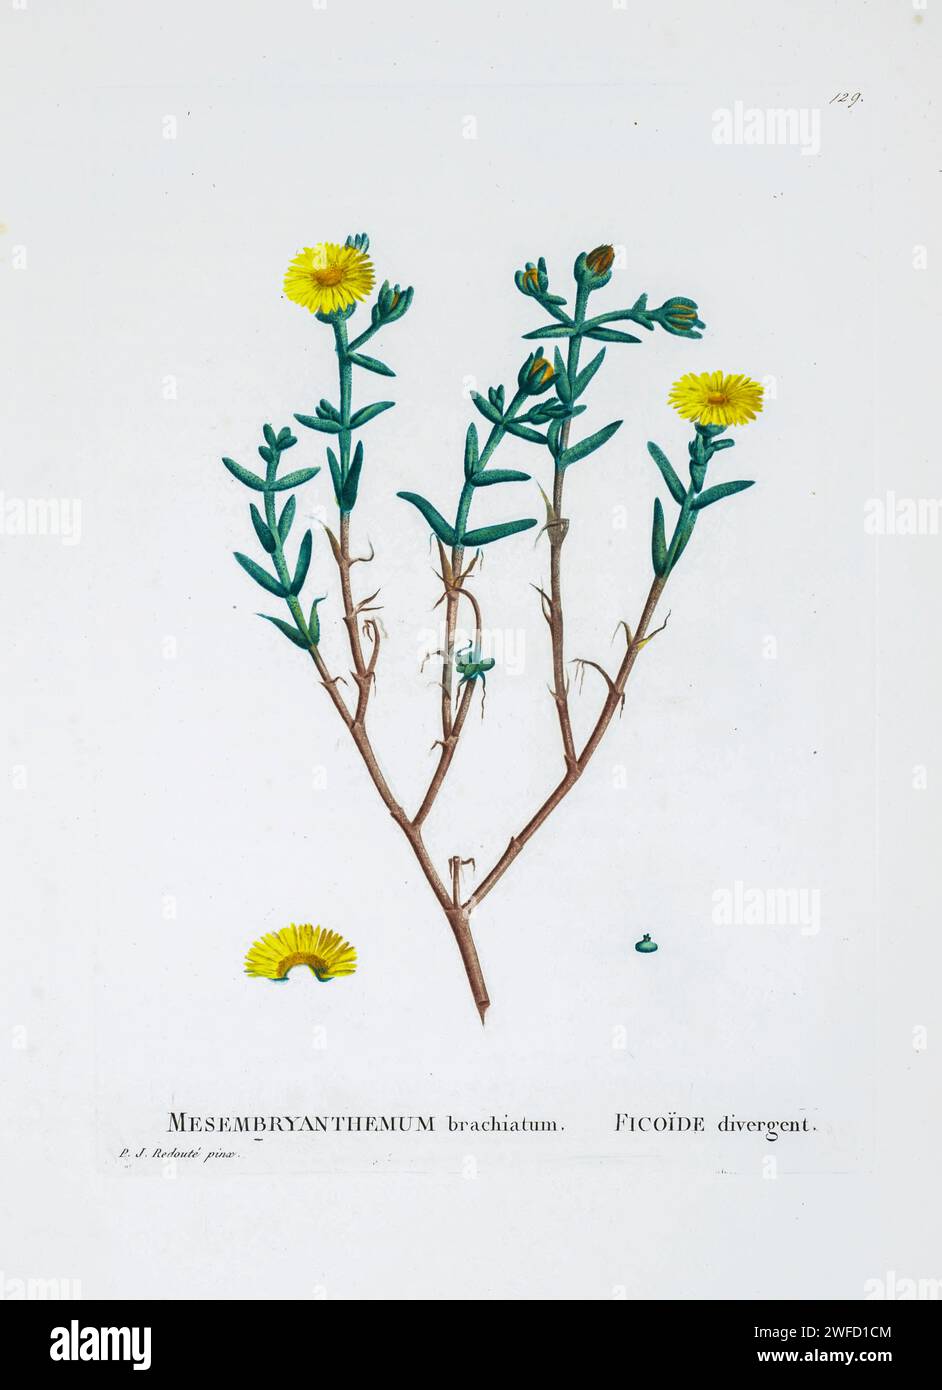 Drosanthemum nitidum (Haw.) Schwant. Here As Mesembryanthemum brachiatum from History of Succulent Plants [Plantarum historia succulentarum / Histoire des plantes grasses] painted by Pierre-Joseph Redouté and described by Augustin Pyramus de Candolle 1799 Drosanthemum is a genus of succulent plants in the ice plant family native to the winter-rainfall regions of southern Africa, including Namibia and the Cape Provinces and Free State of South Africa. Most species bear colorful flowers. Stock Photo